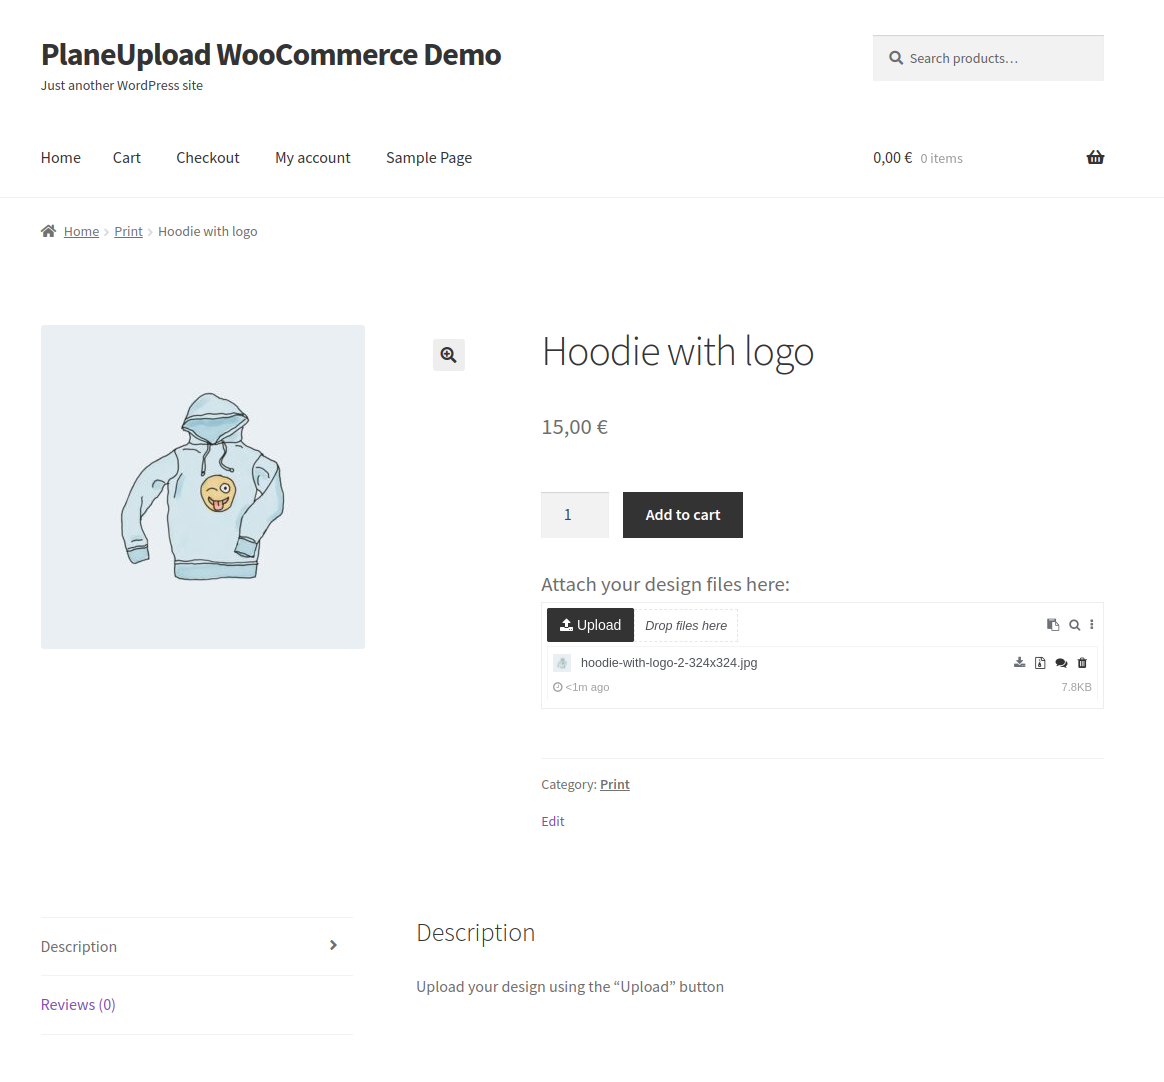 WooCommerce allow the customer to add files to product